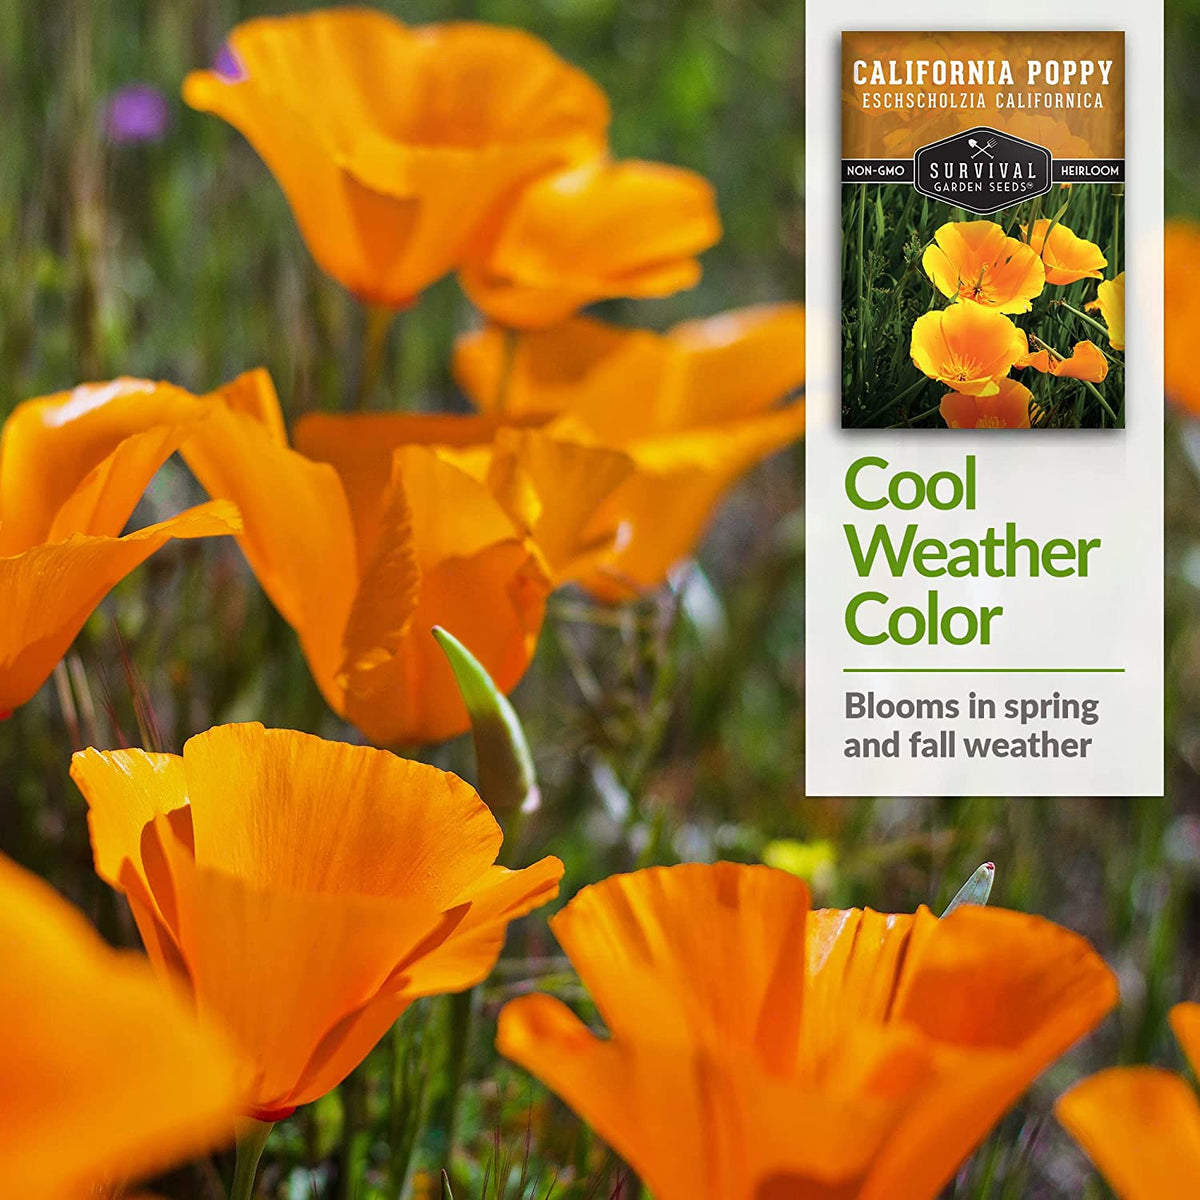 California Poppies bloom in the Spring and Fall weather